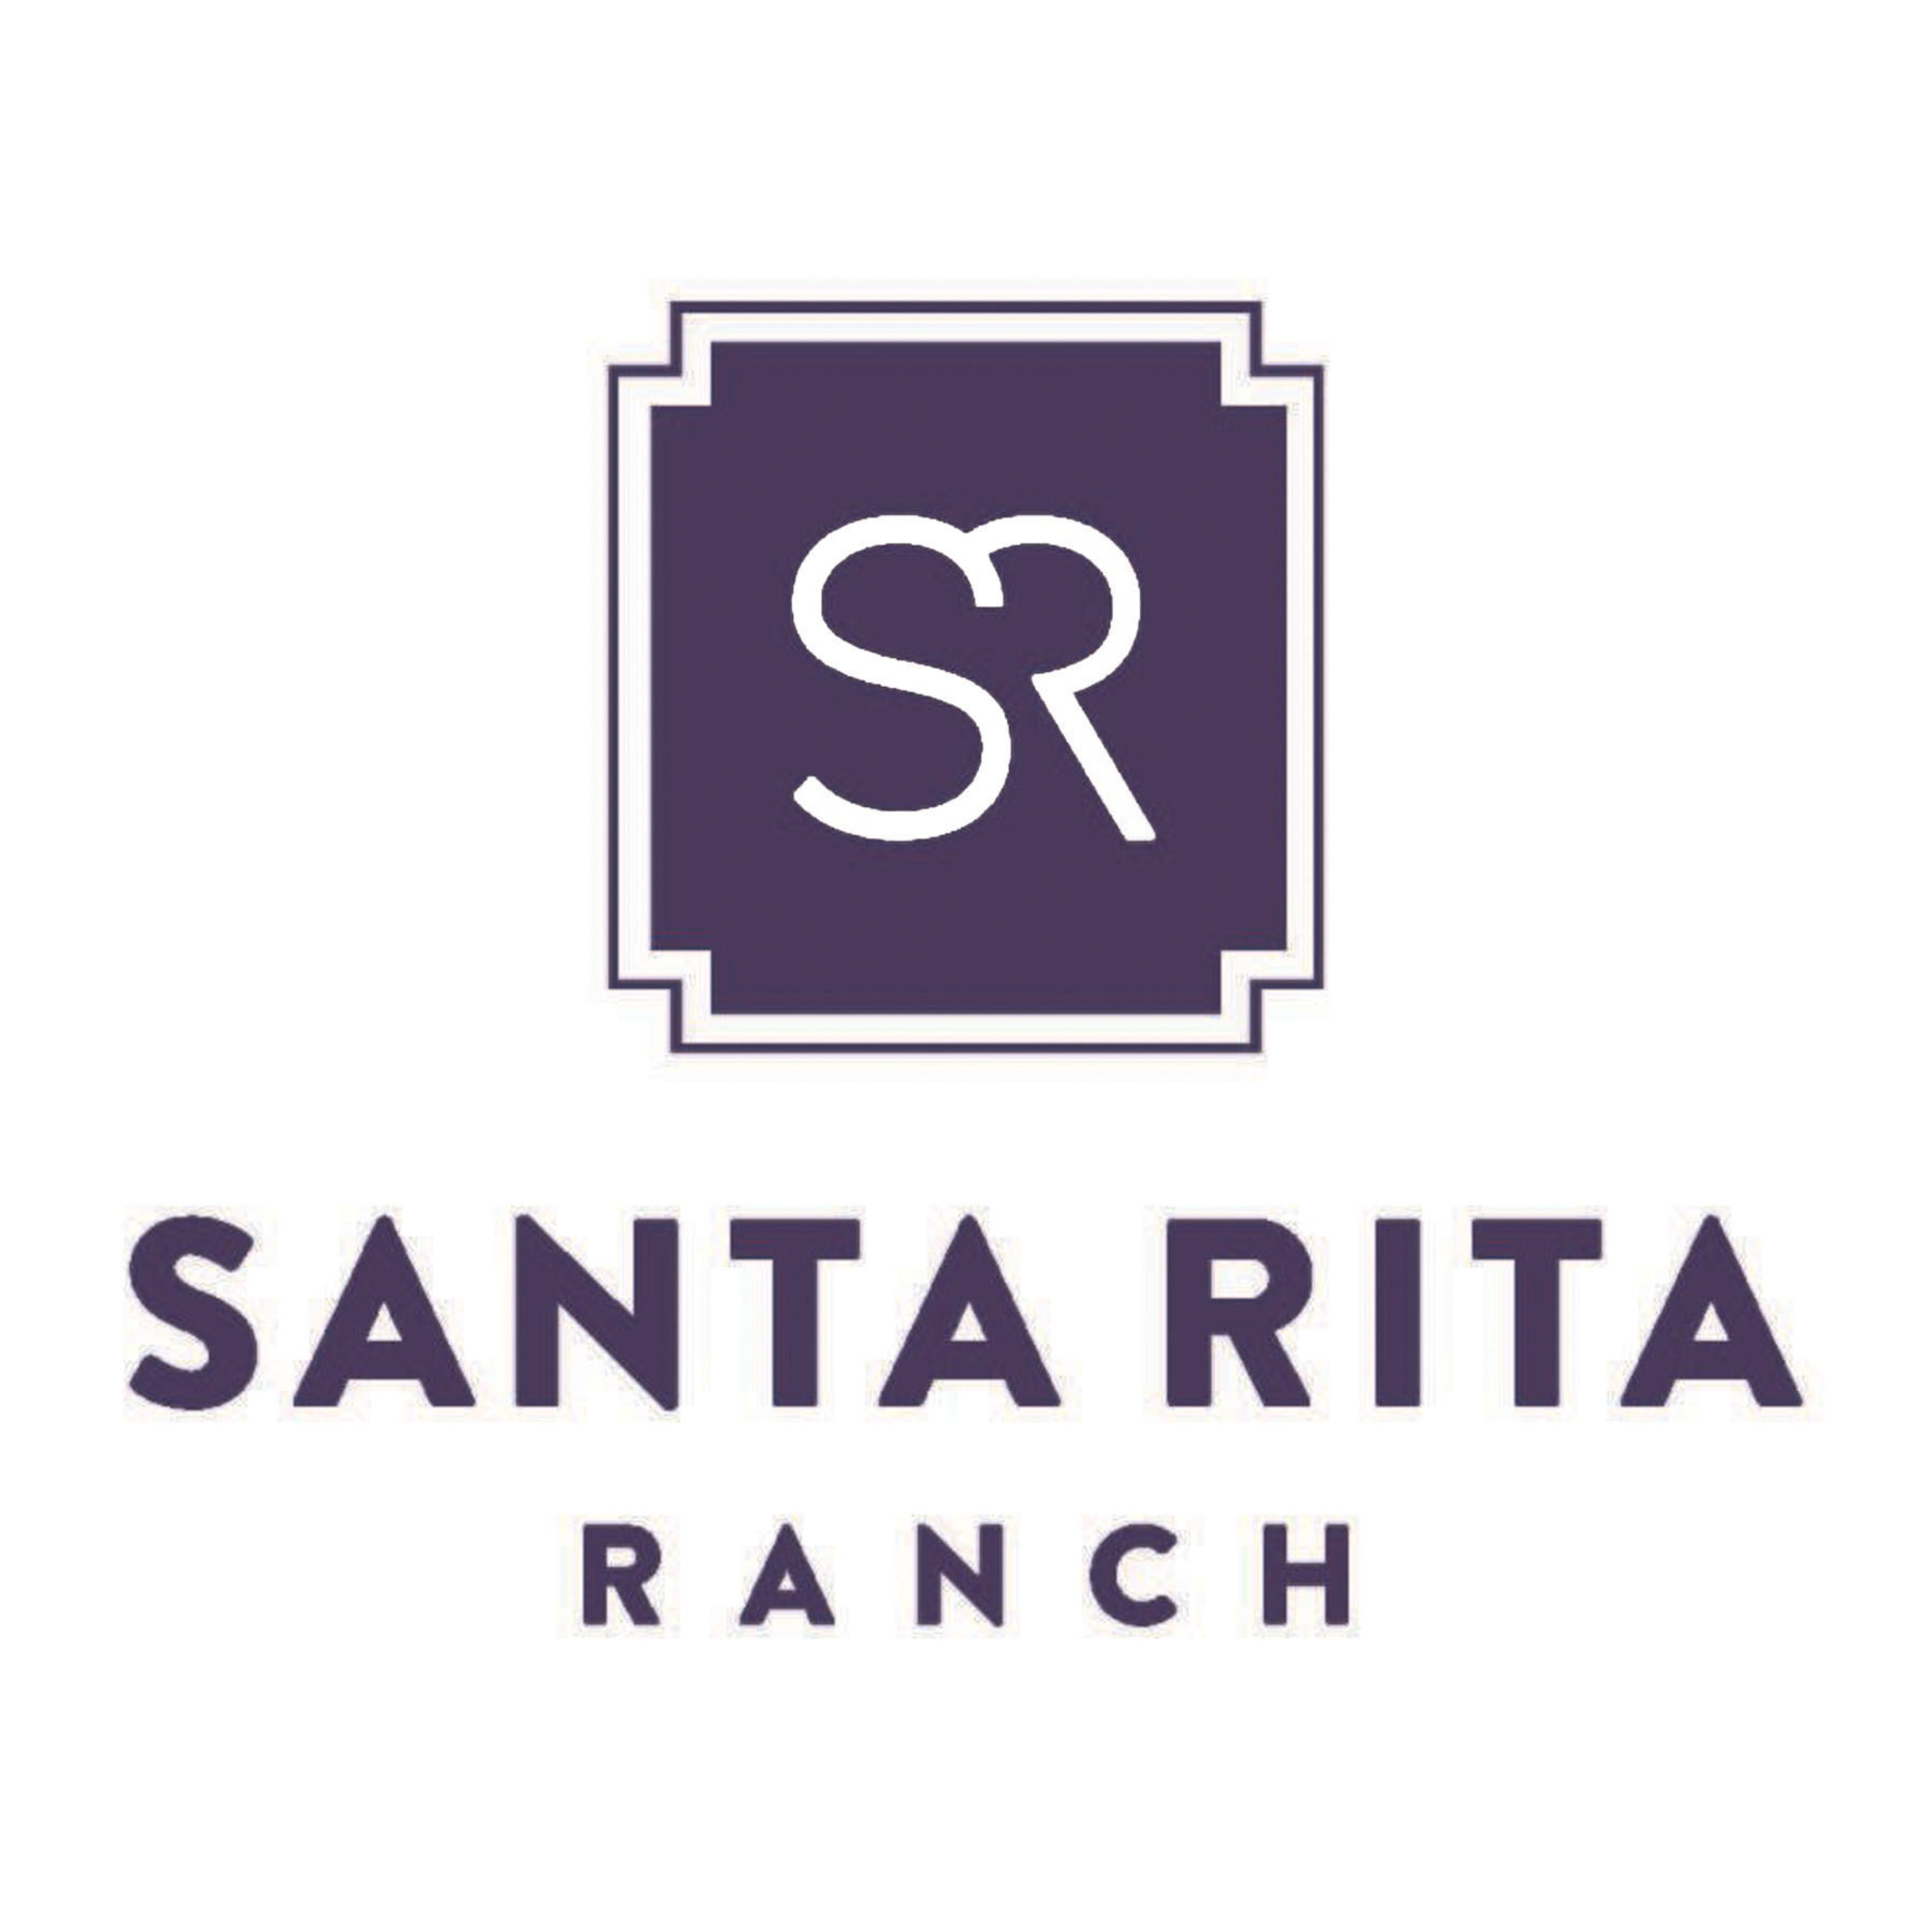 Santa Rita Ranch is located in Georgetown, Texas in the scenic Texas Hill Country.  Grand Opening for Santa Rita Ranch begins April 18-19, 2015.